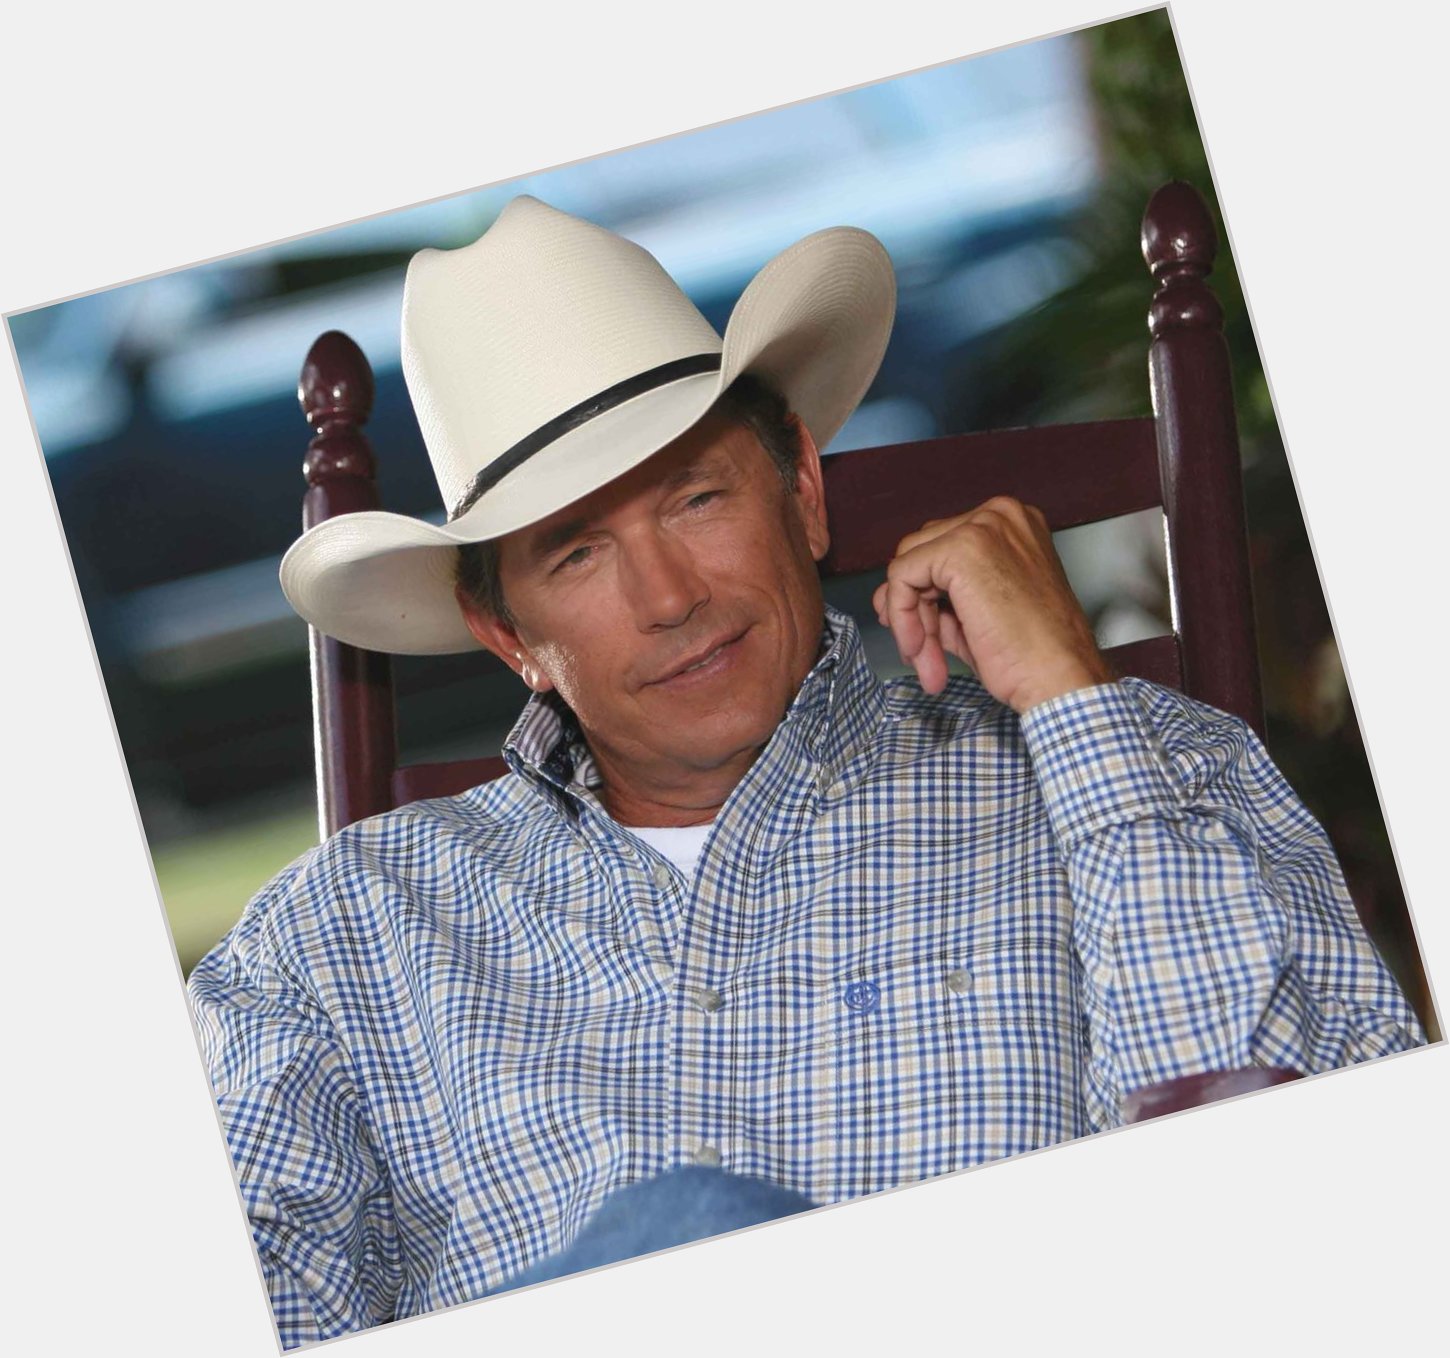 Happy 63rd Birthday to my pal and the King of Country - George Strait! Live it up  